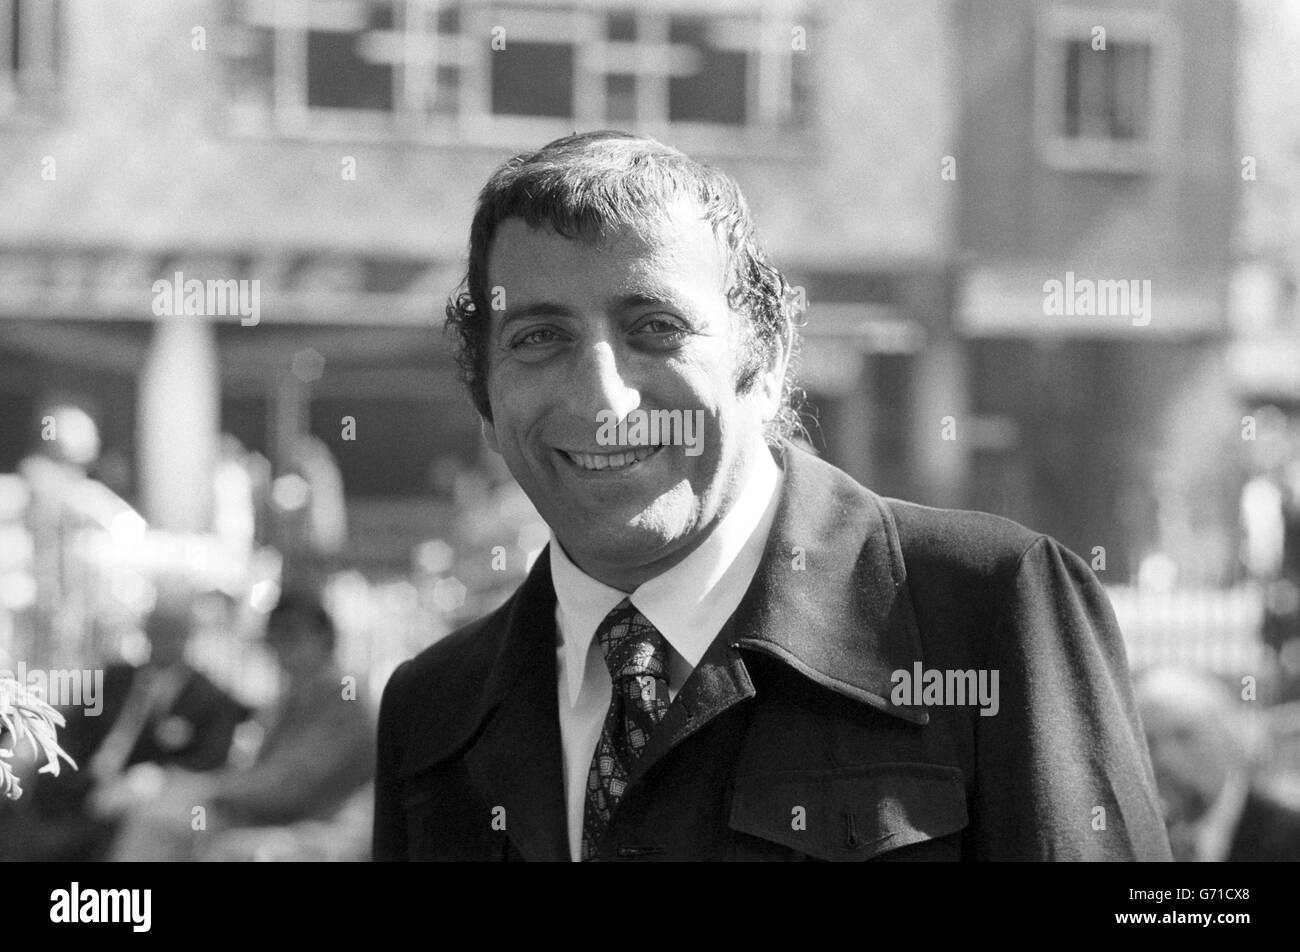 Music - Tony Bennett - London. American singer Tony Bennett, who is due to embark on a 19-day UK tour. Stock Photo